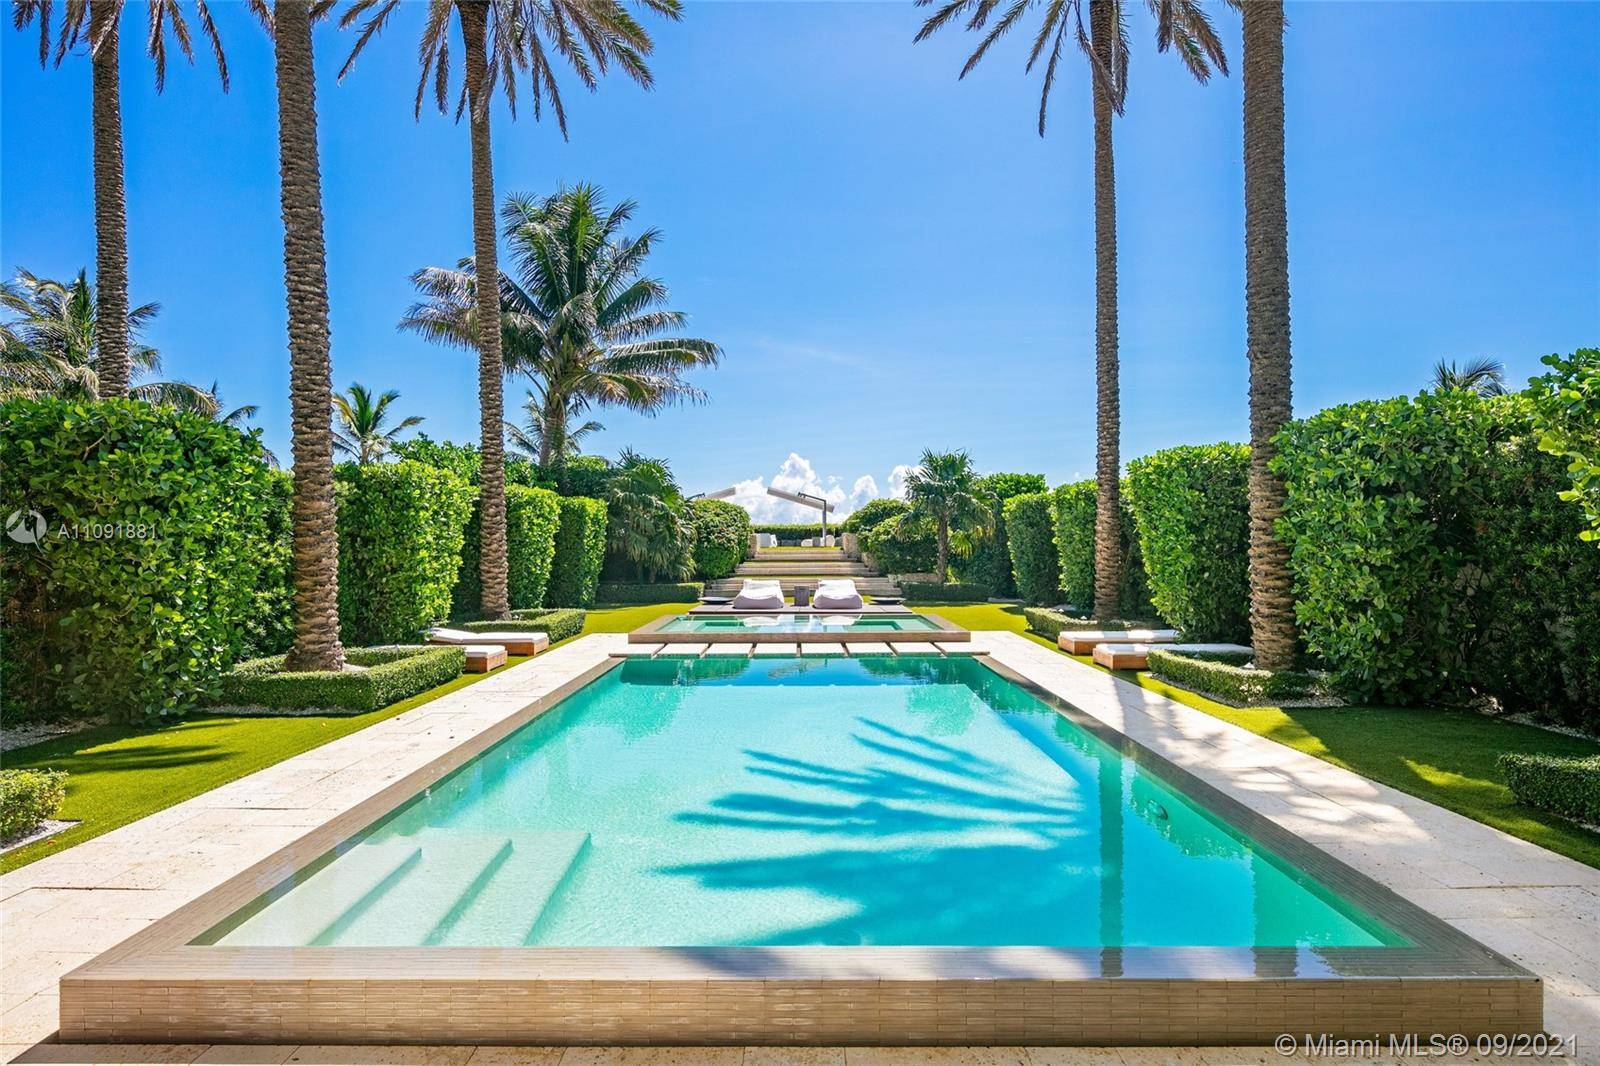 Enjoy a life on the ocean in one of only 12 beachfront homes in all of Miami Beach.